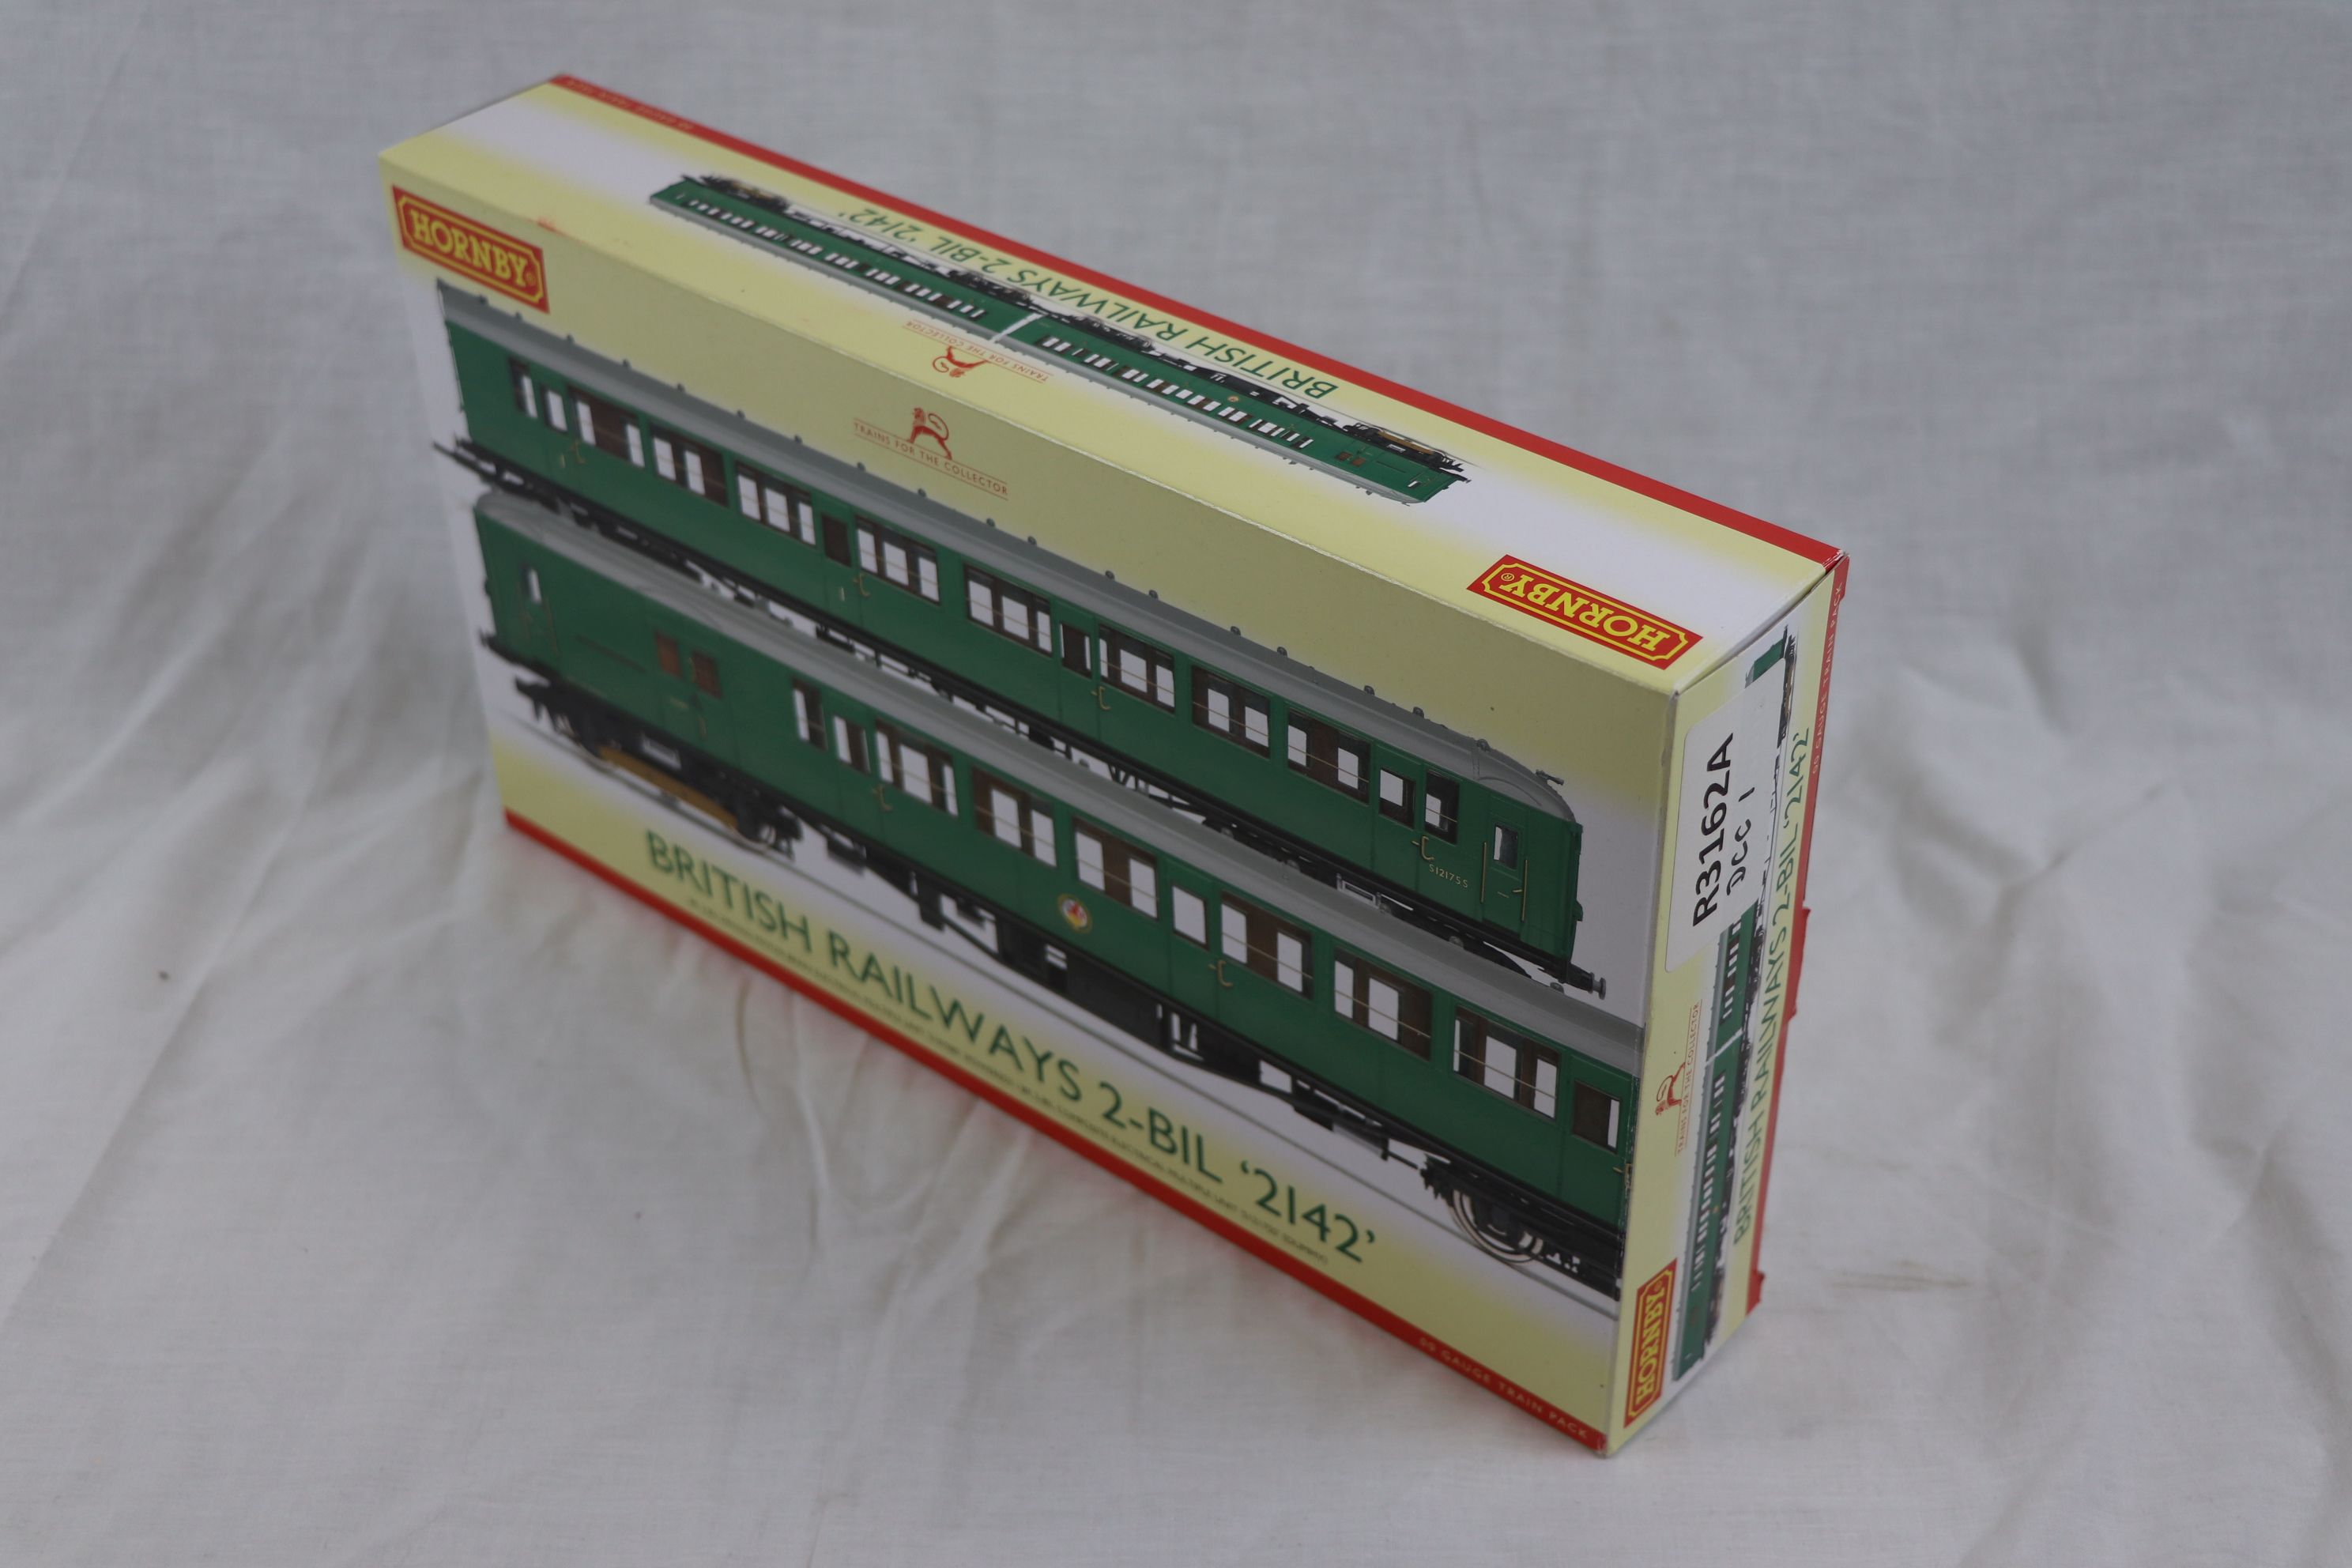 Boxed Hornby OO gauge R3162A British Railways 2-BIL 2142 DCC Ready Train Pack with decoder fitted - Image 2 of 3